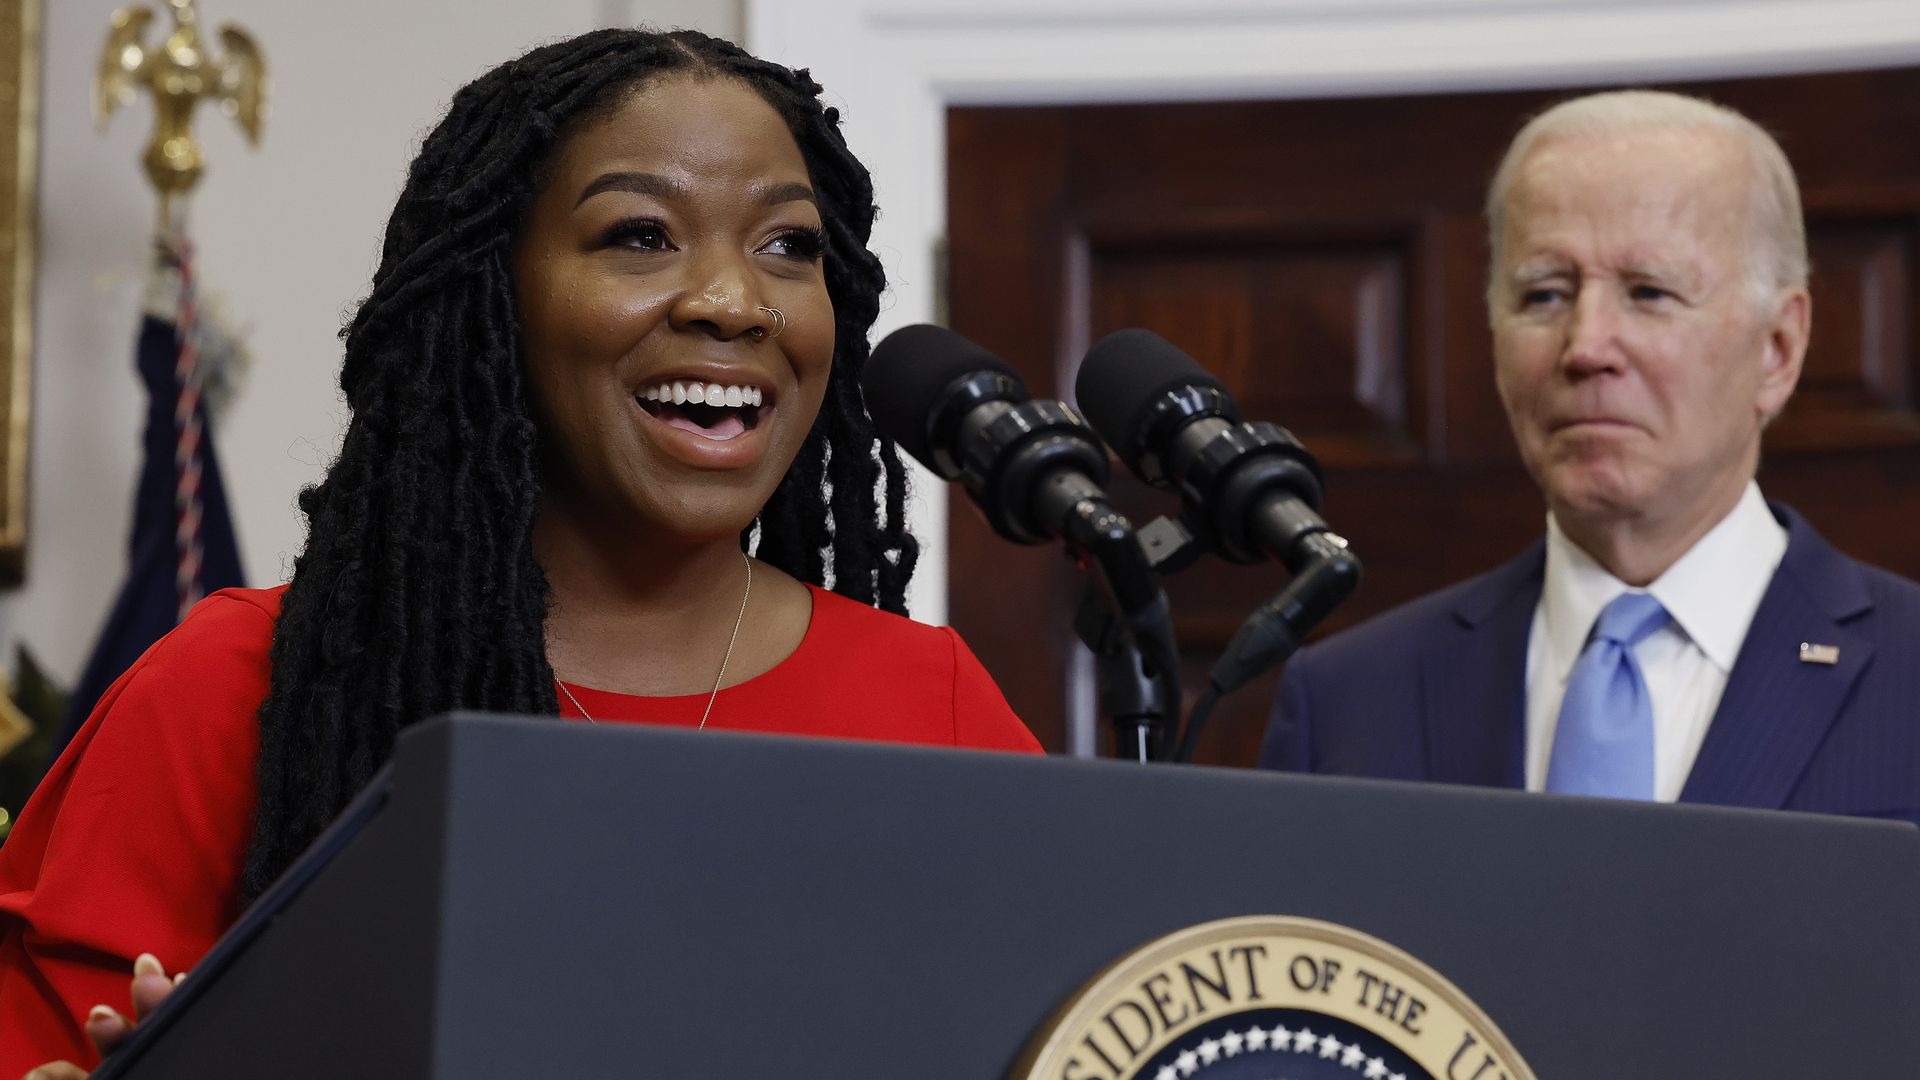 Cherelle Griner (L), wife of Olympian and WNBA player Brittney Griner, speaks after U.S. President Joe Biden announced her release from Russian custody, at the White House on December 08, 2022